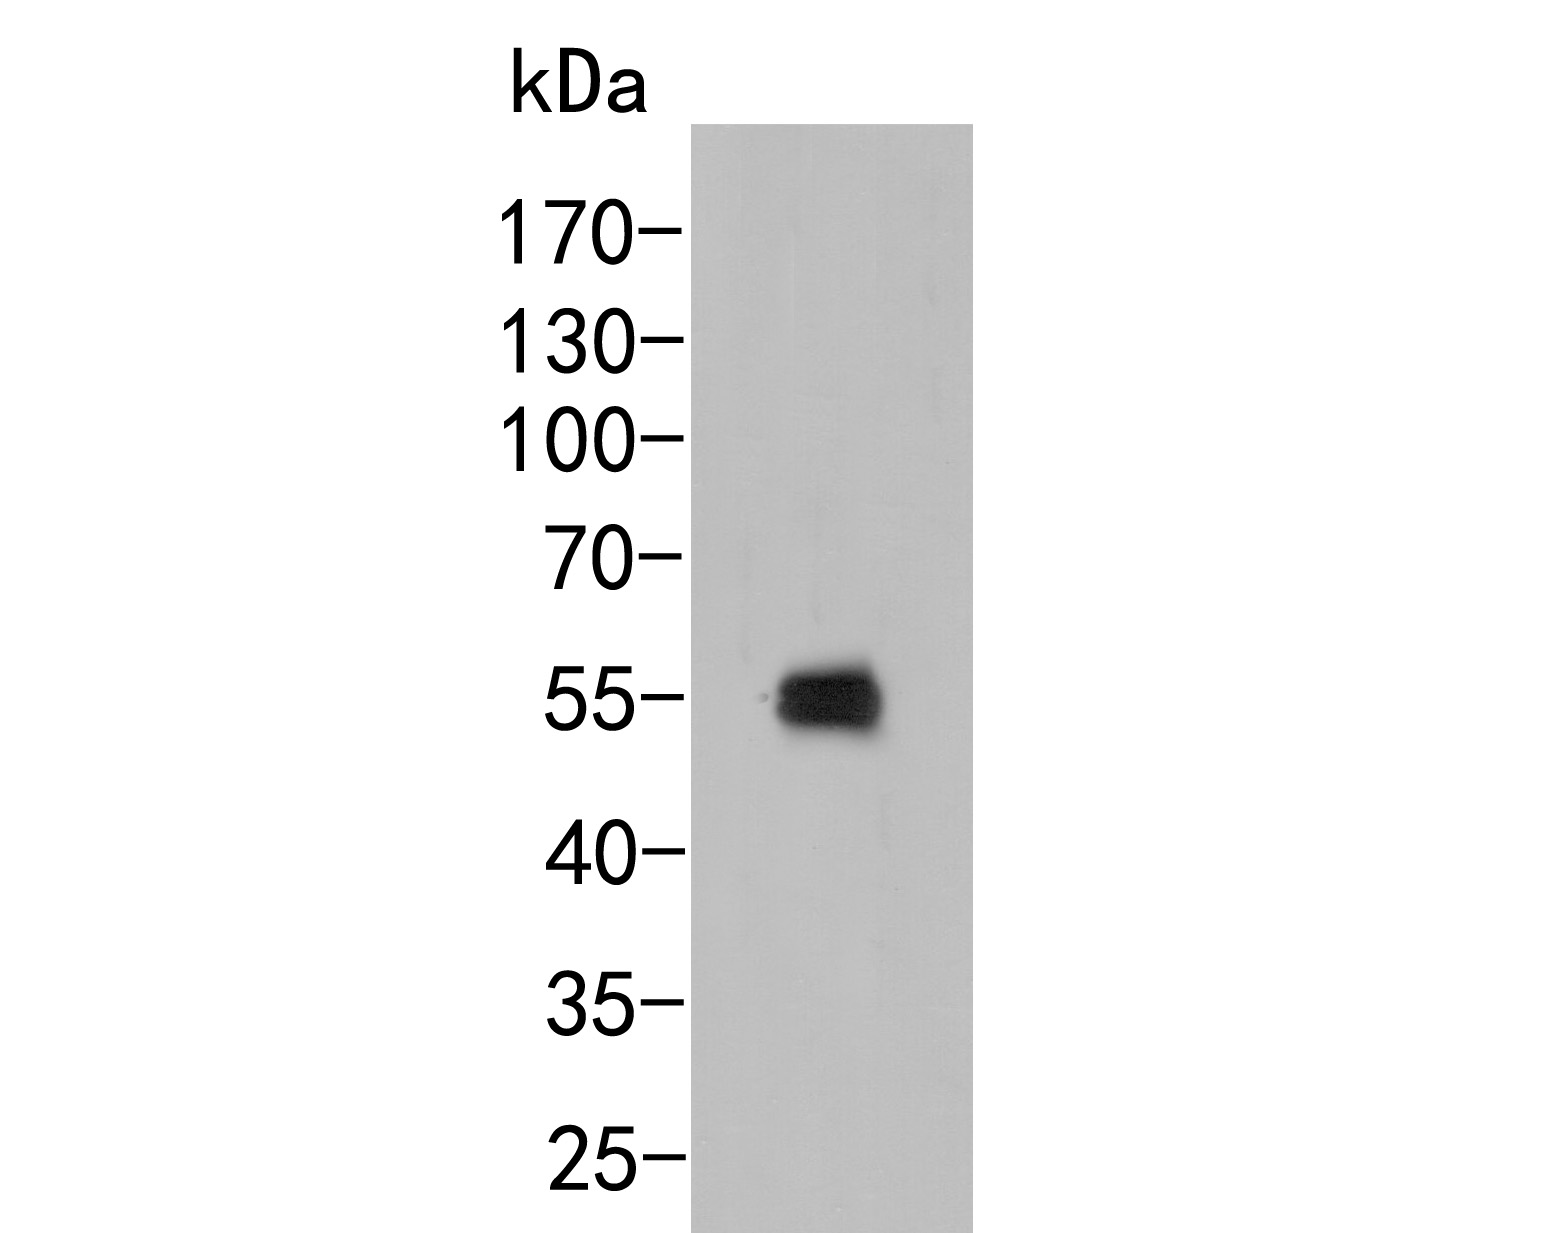 Western blot analysis of MST1 on mouse bone marrow tissue lysates. Proteins were transferred to a PVDF membrane and blocked with 5% BSA in PBS for 1 hour at room temperature. The primary antibody (HA500031, 1/500) was used in 5% BSA at room temperature for 2 hours. Goat Anti-Rabbit IgG - HRP Secondary Antibody (HA1001) at 1:5,000 dilution was used for 1 hour at room temperature.